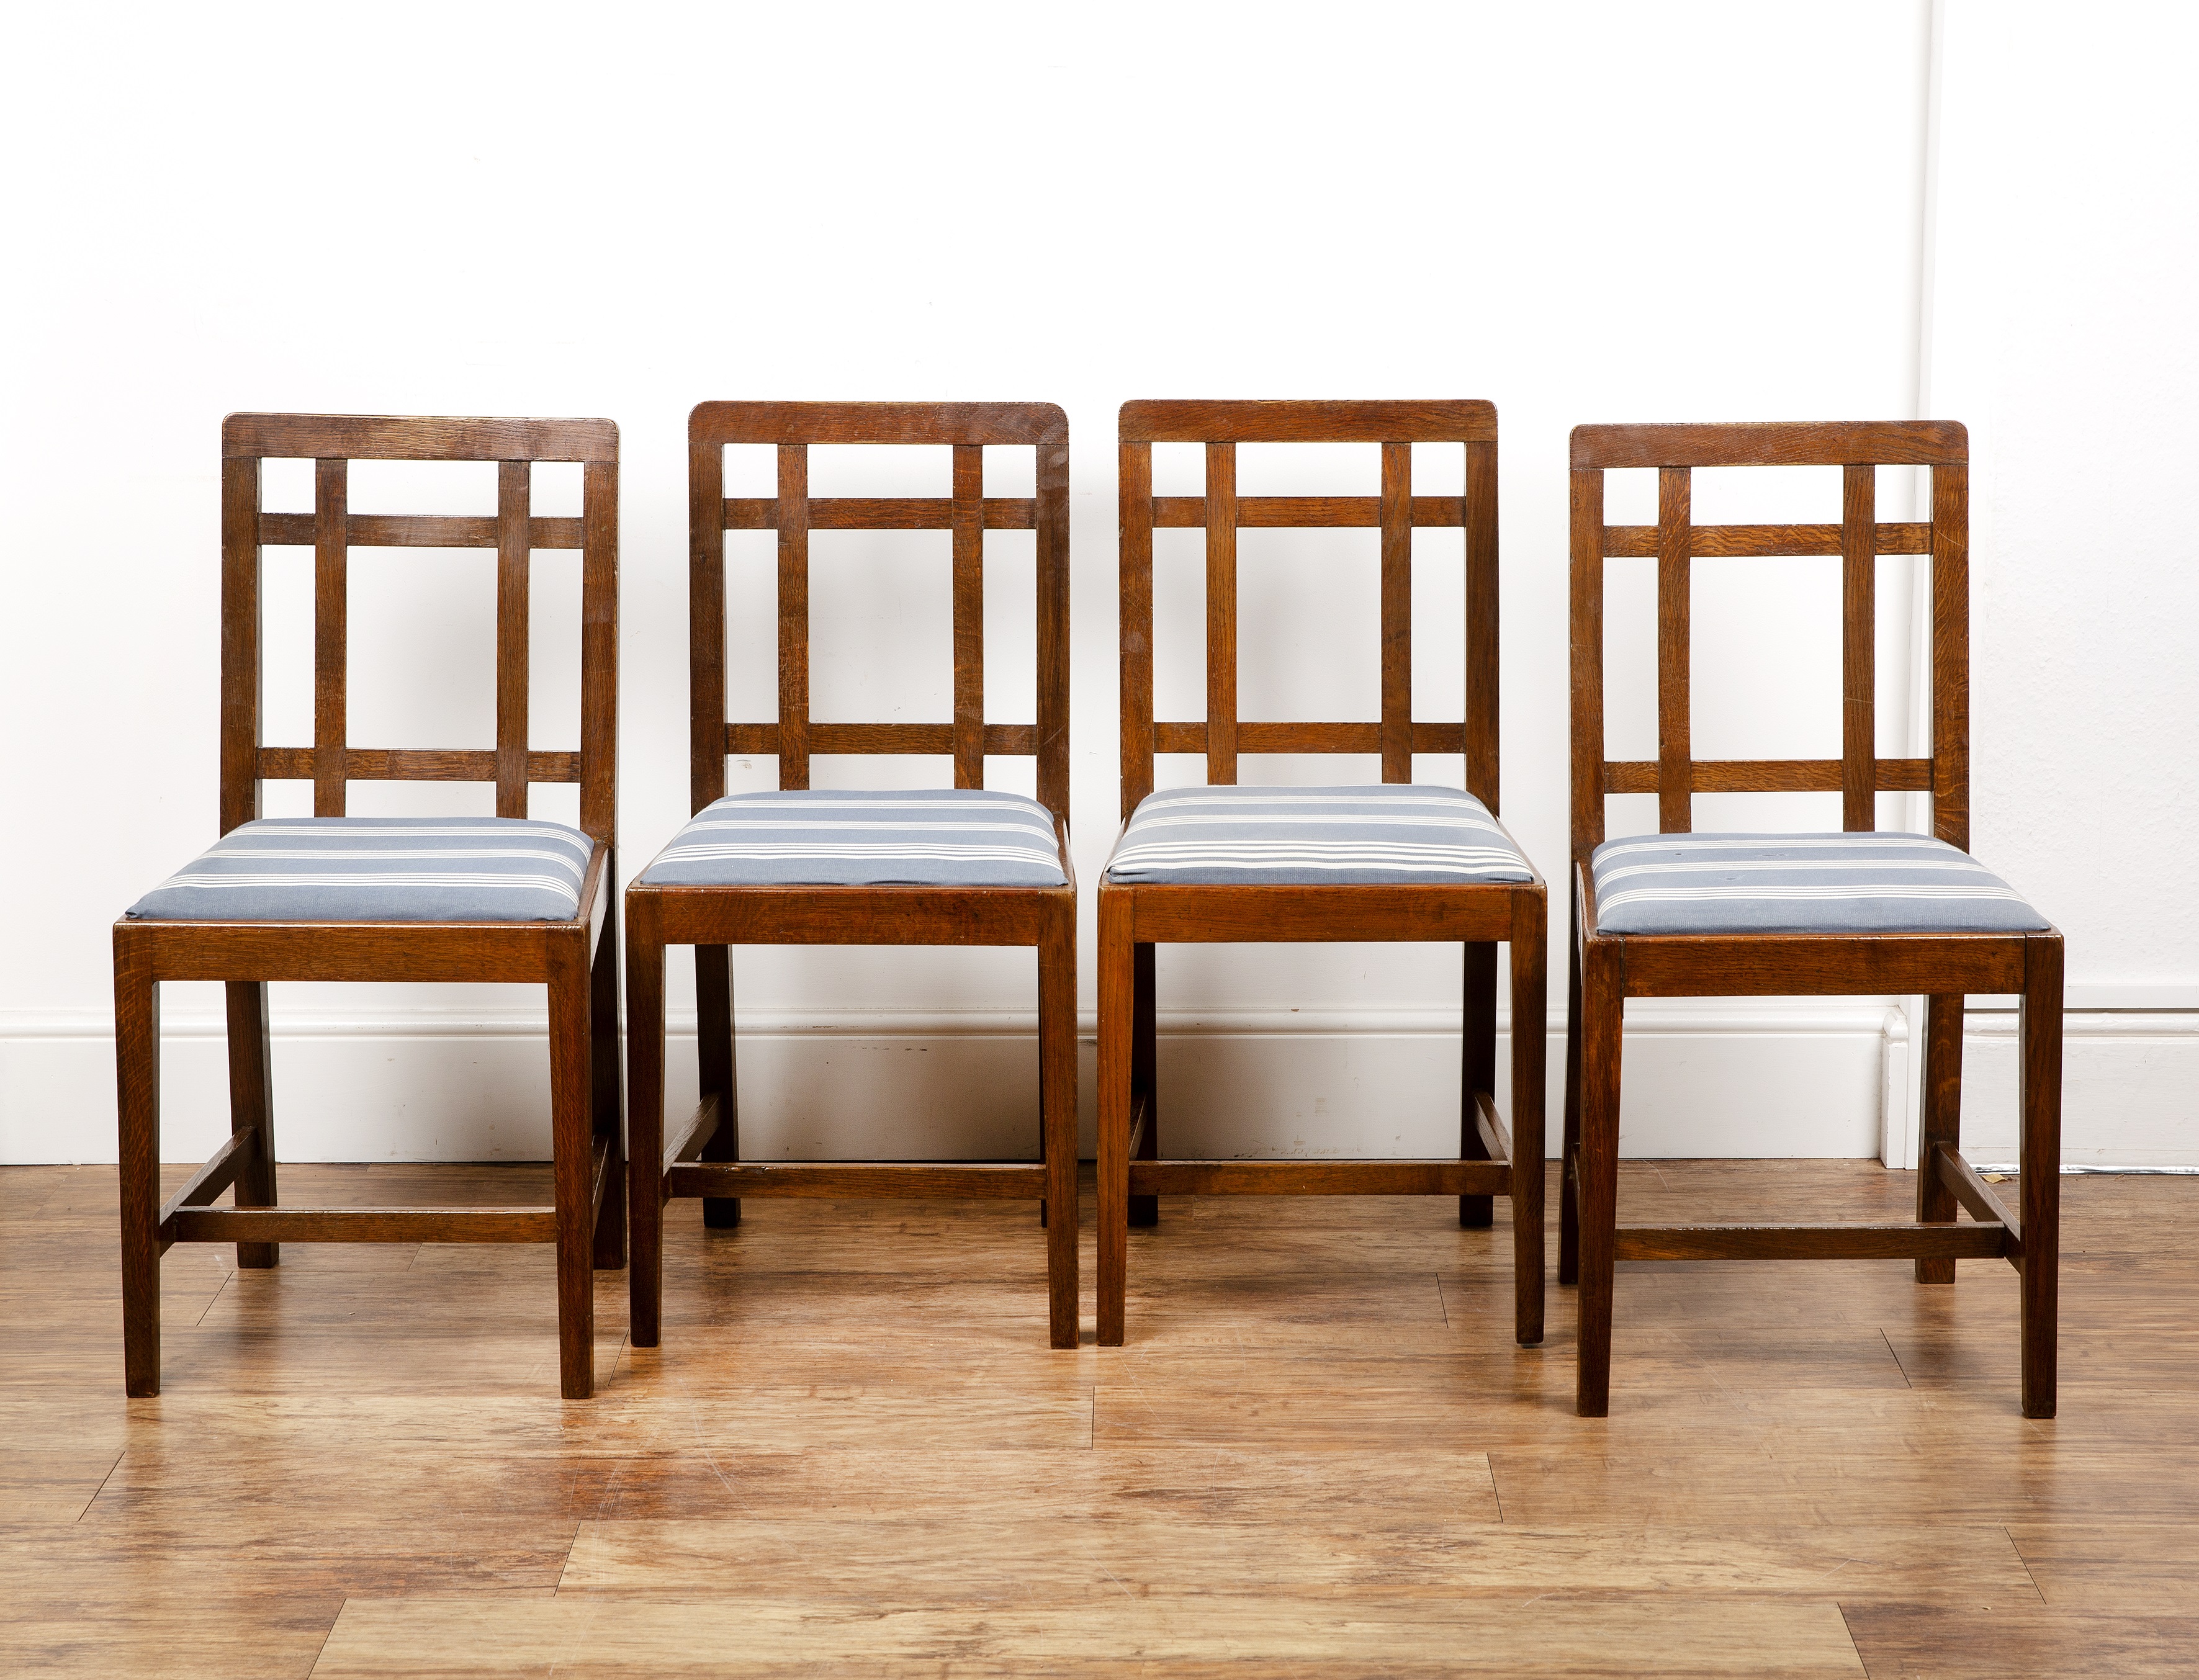 Paul Matt for Brynmawr furniture oak, set of four 'Mount' dining chairs, the seats with striped